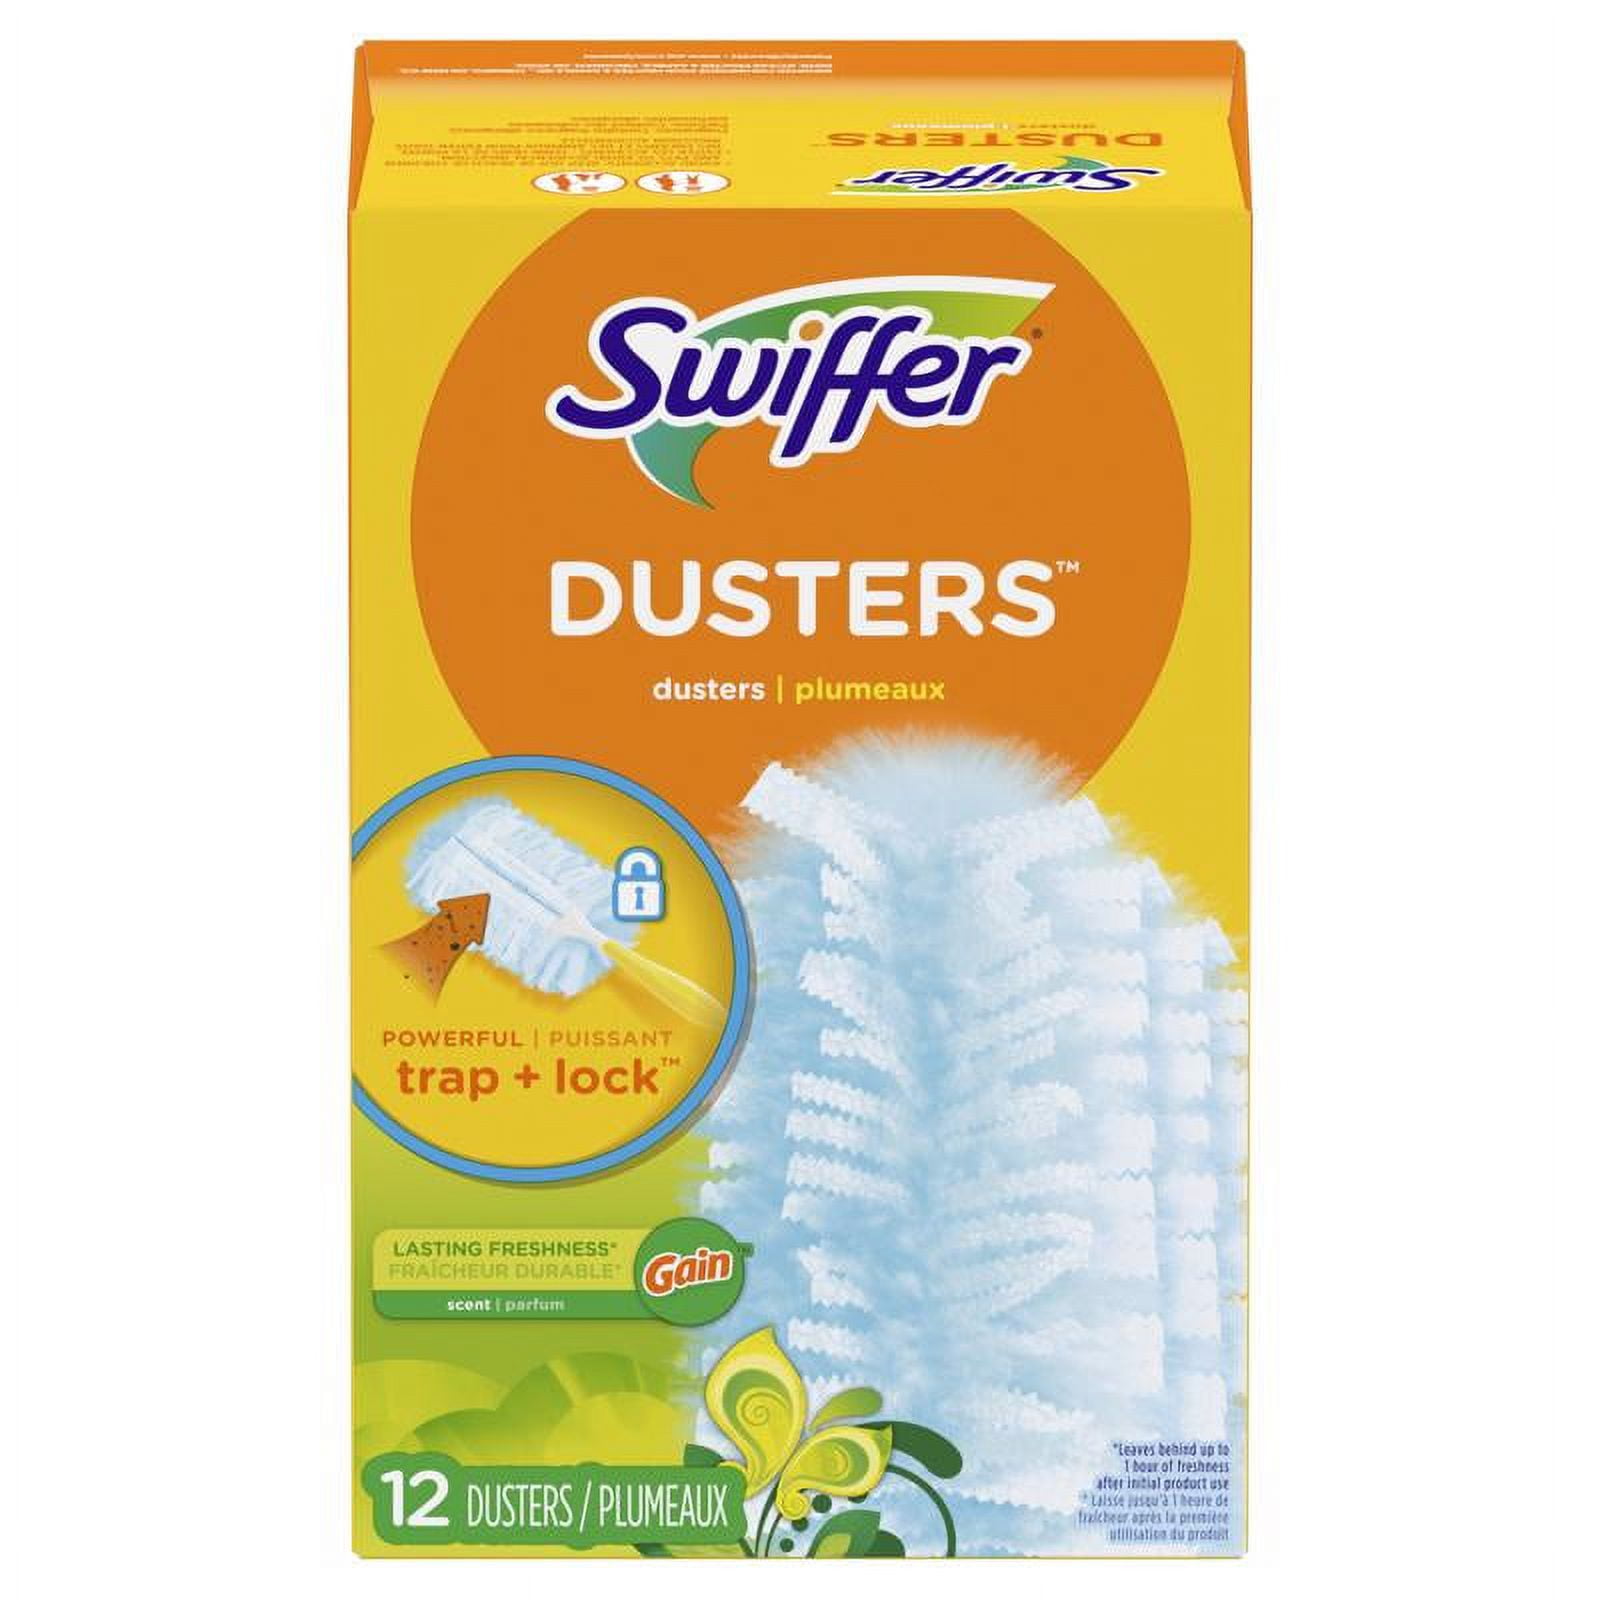 Swiffer® Refill Dusters – ABCO